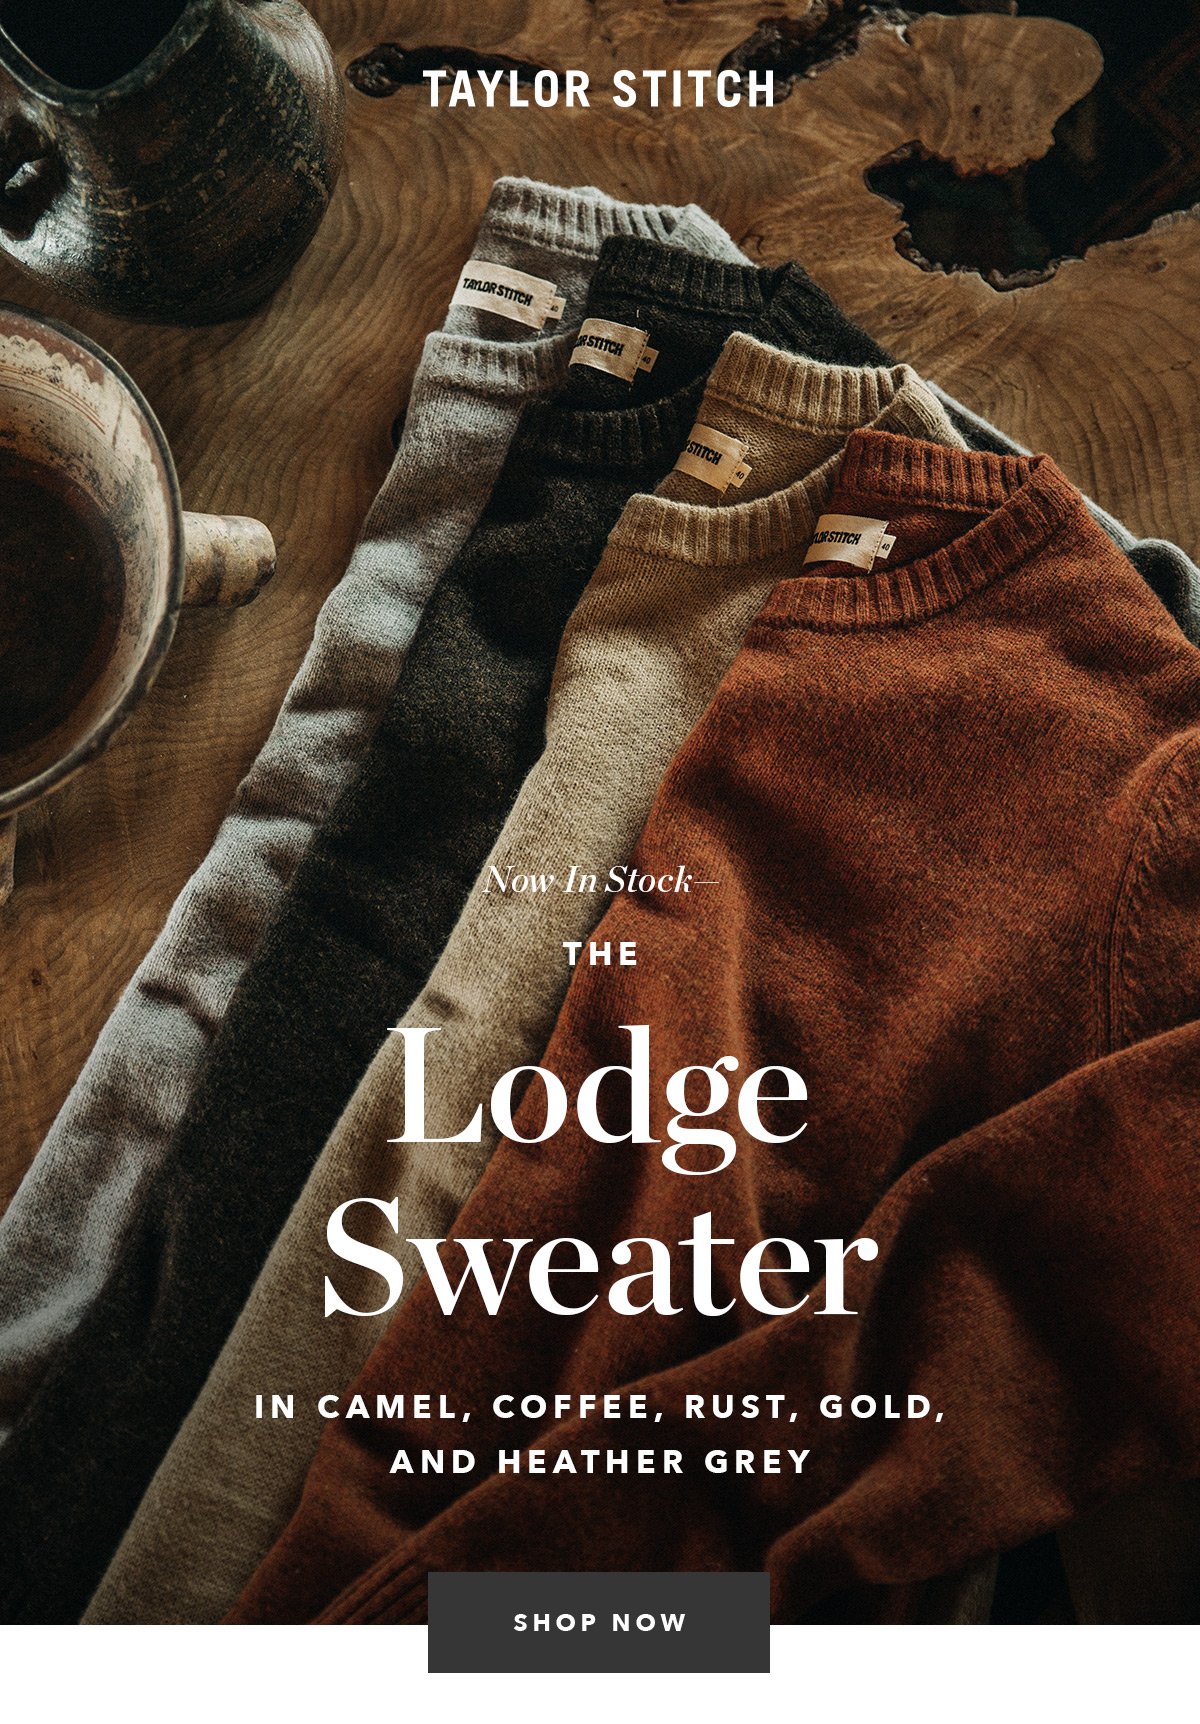 The Lodge Sweater in Camel, Coffee, Rust, Gold, and Heather Grey